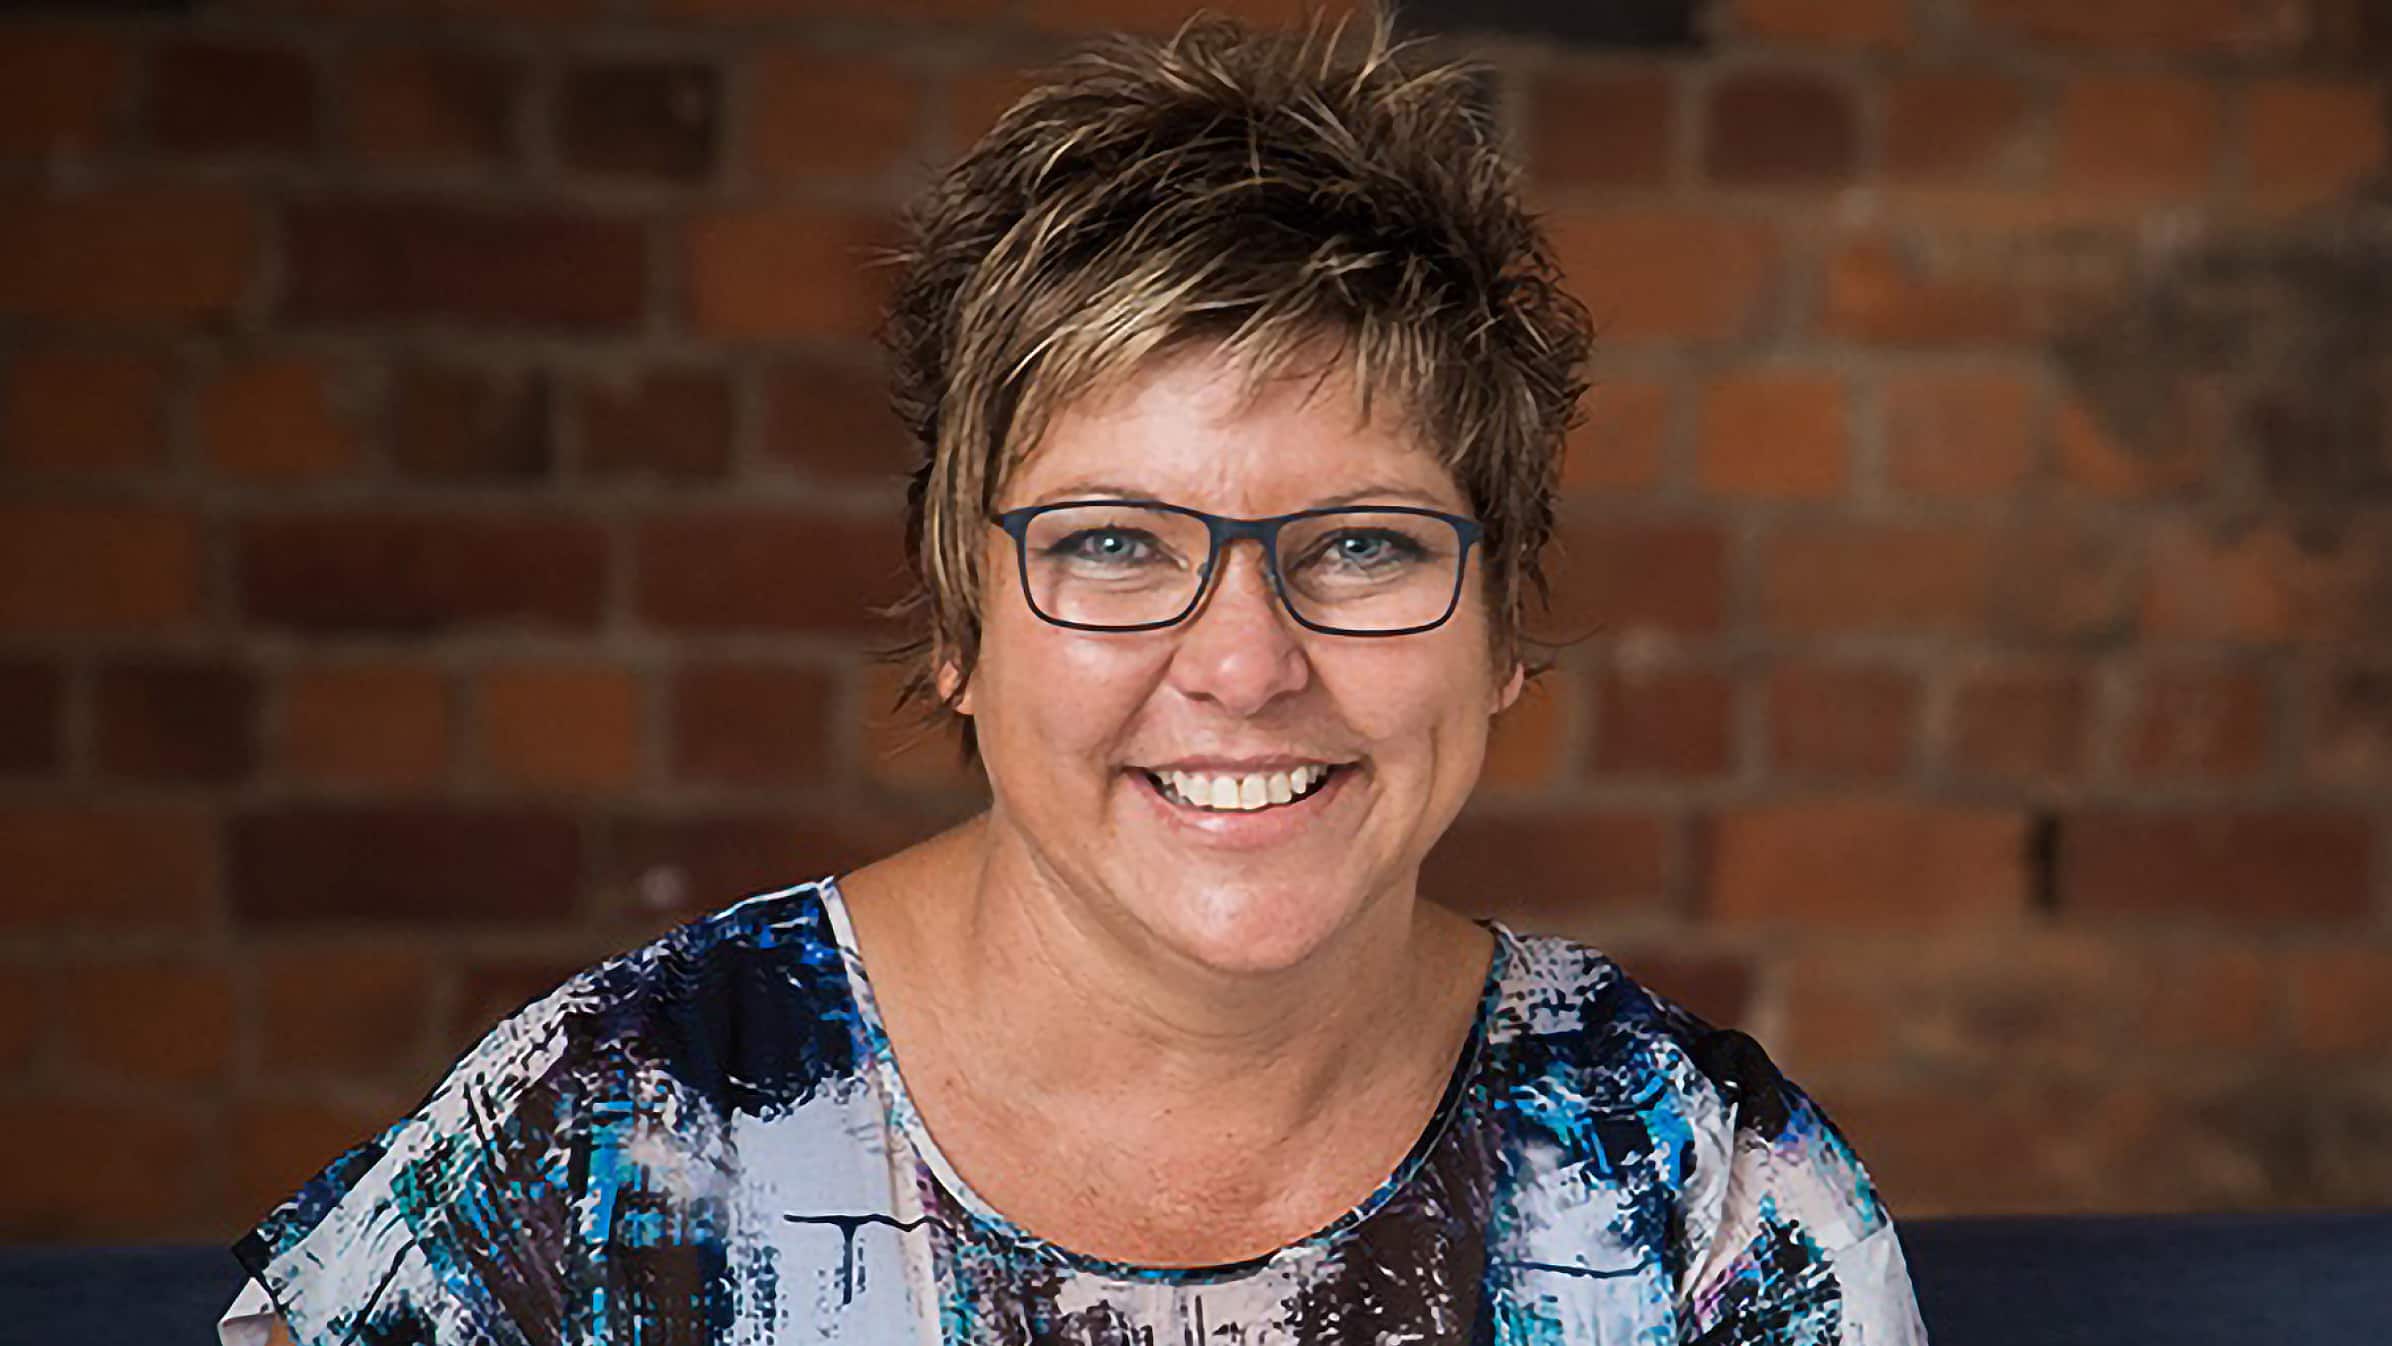 Di Crawford-Errington, owner of Ontrack Bookkeeping, smiling to camera against brick wall backdrop.